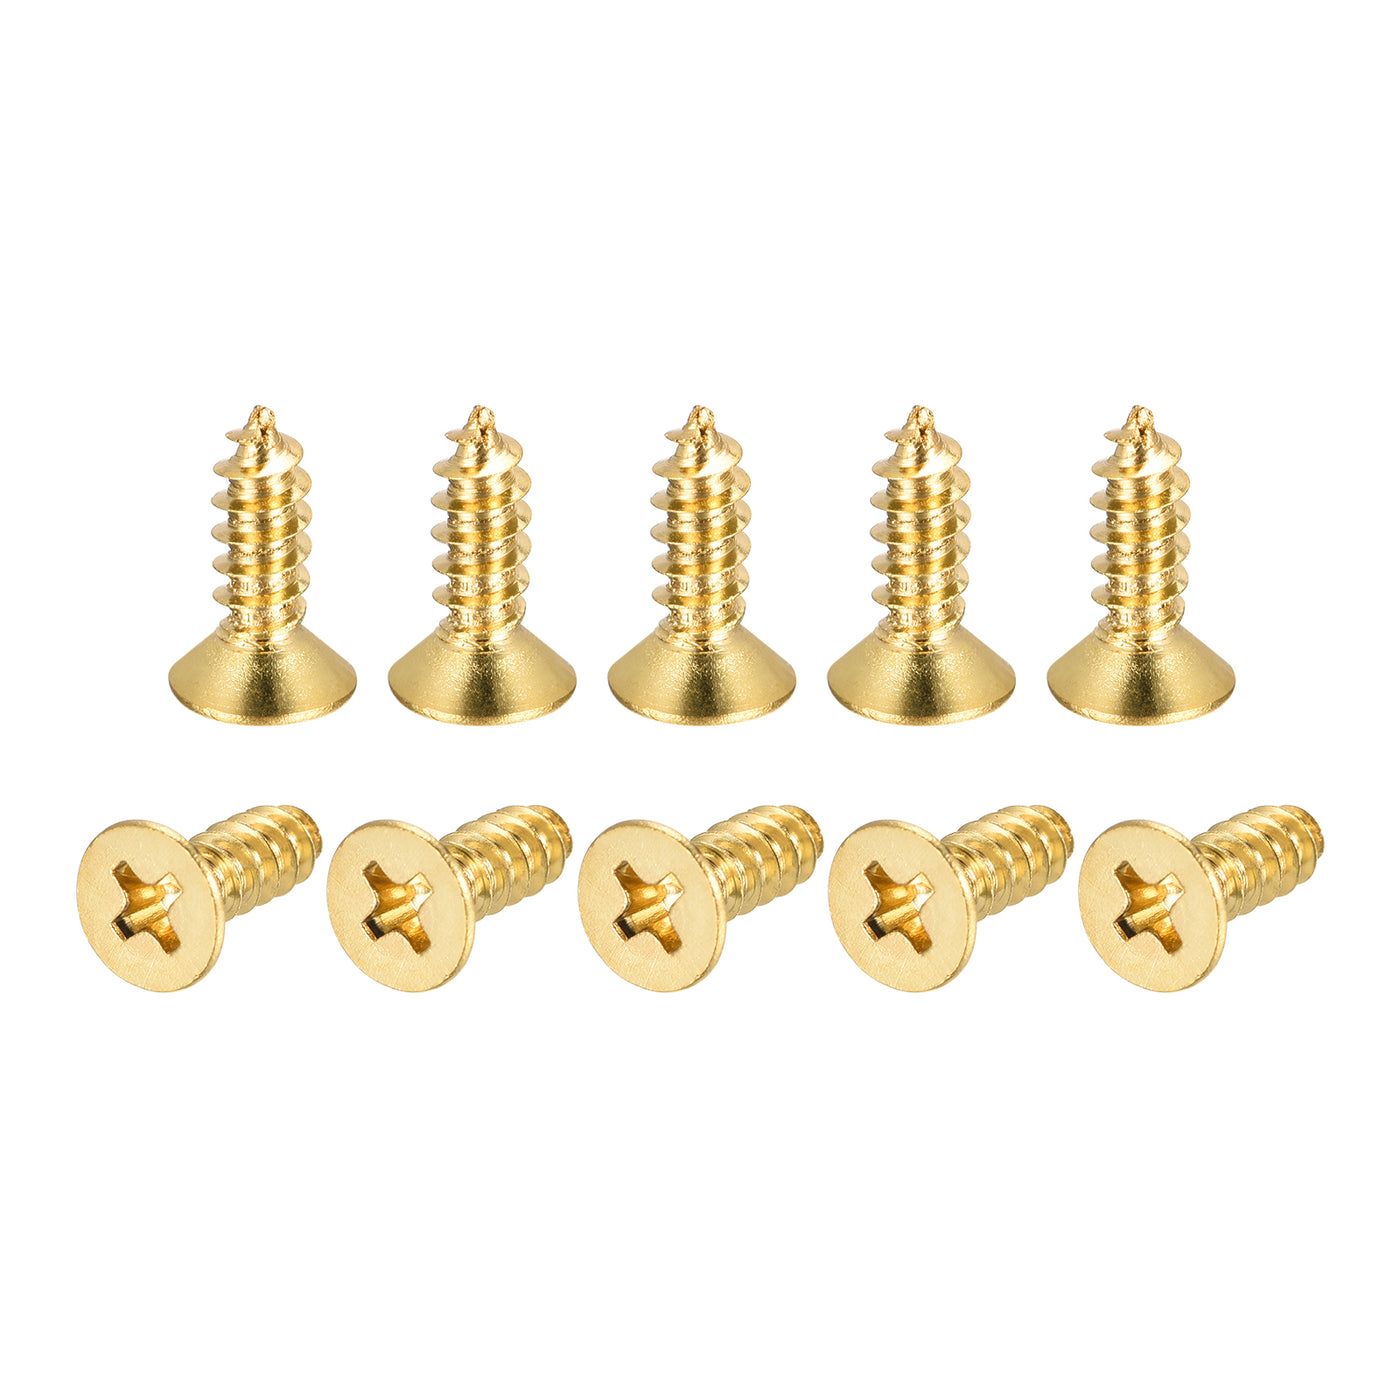 uxcell Uxcell Brass Wood Screws, M5x16mm Phillips Flat Head Self Tapping Connector for Door Hinges, Wooden Furniture, Home Appliances 48Pcs